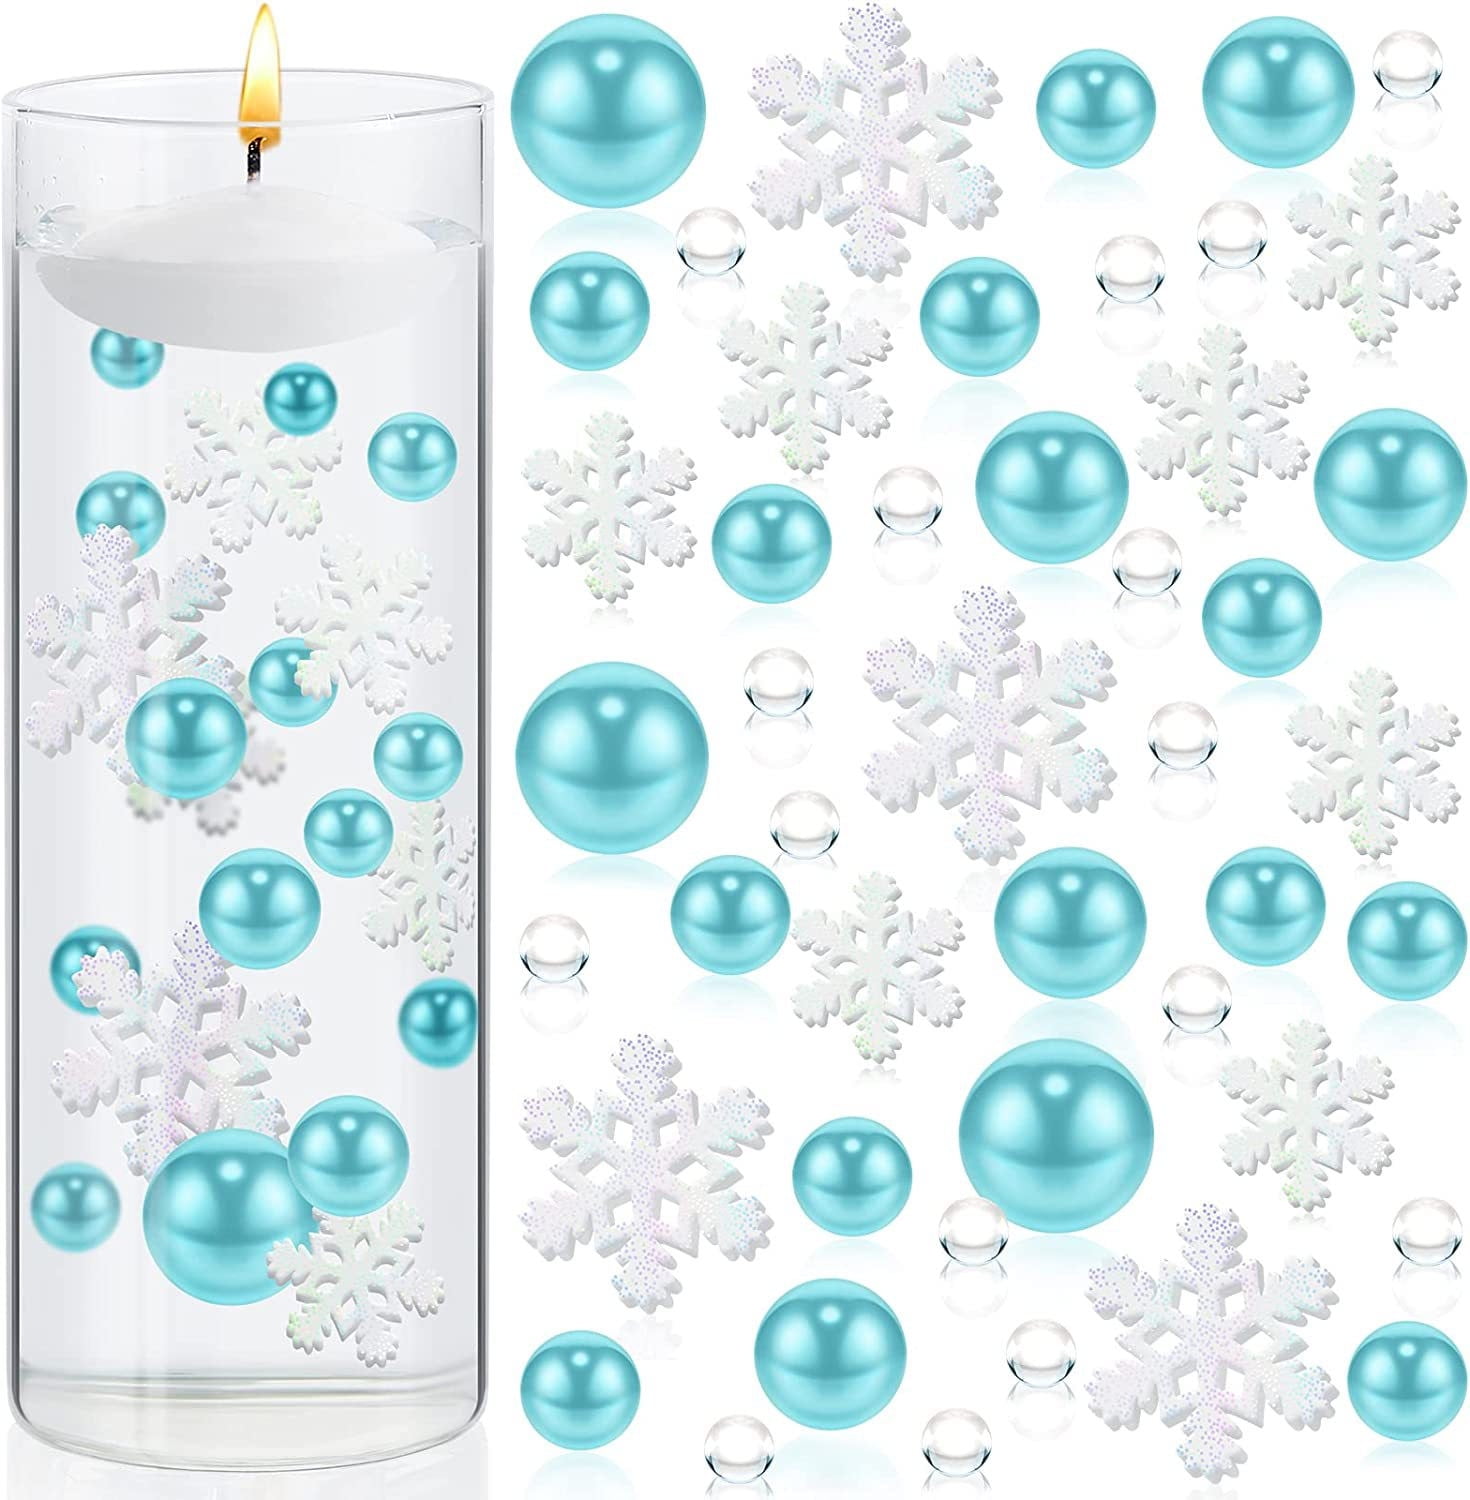 HFYZZ 6106Pcs Christmas Vase Filler Decorations, Blue and White Snowflake  Pearl Beads with Water Gel Jelly Beads Vase Filler Faux Floating Pearls for